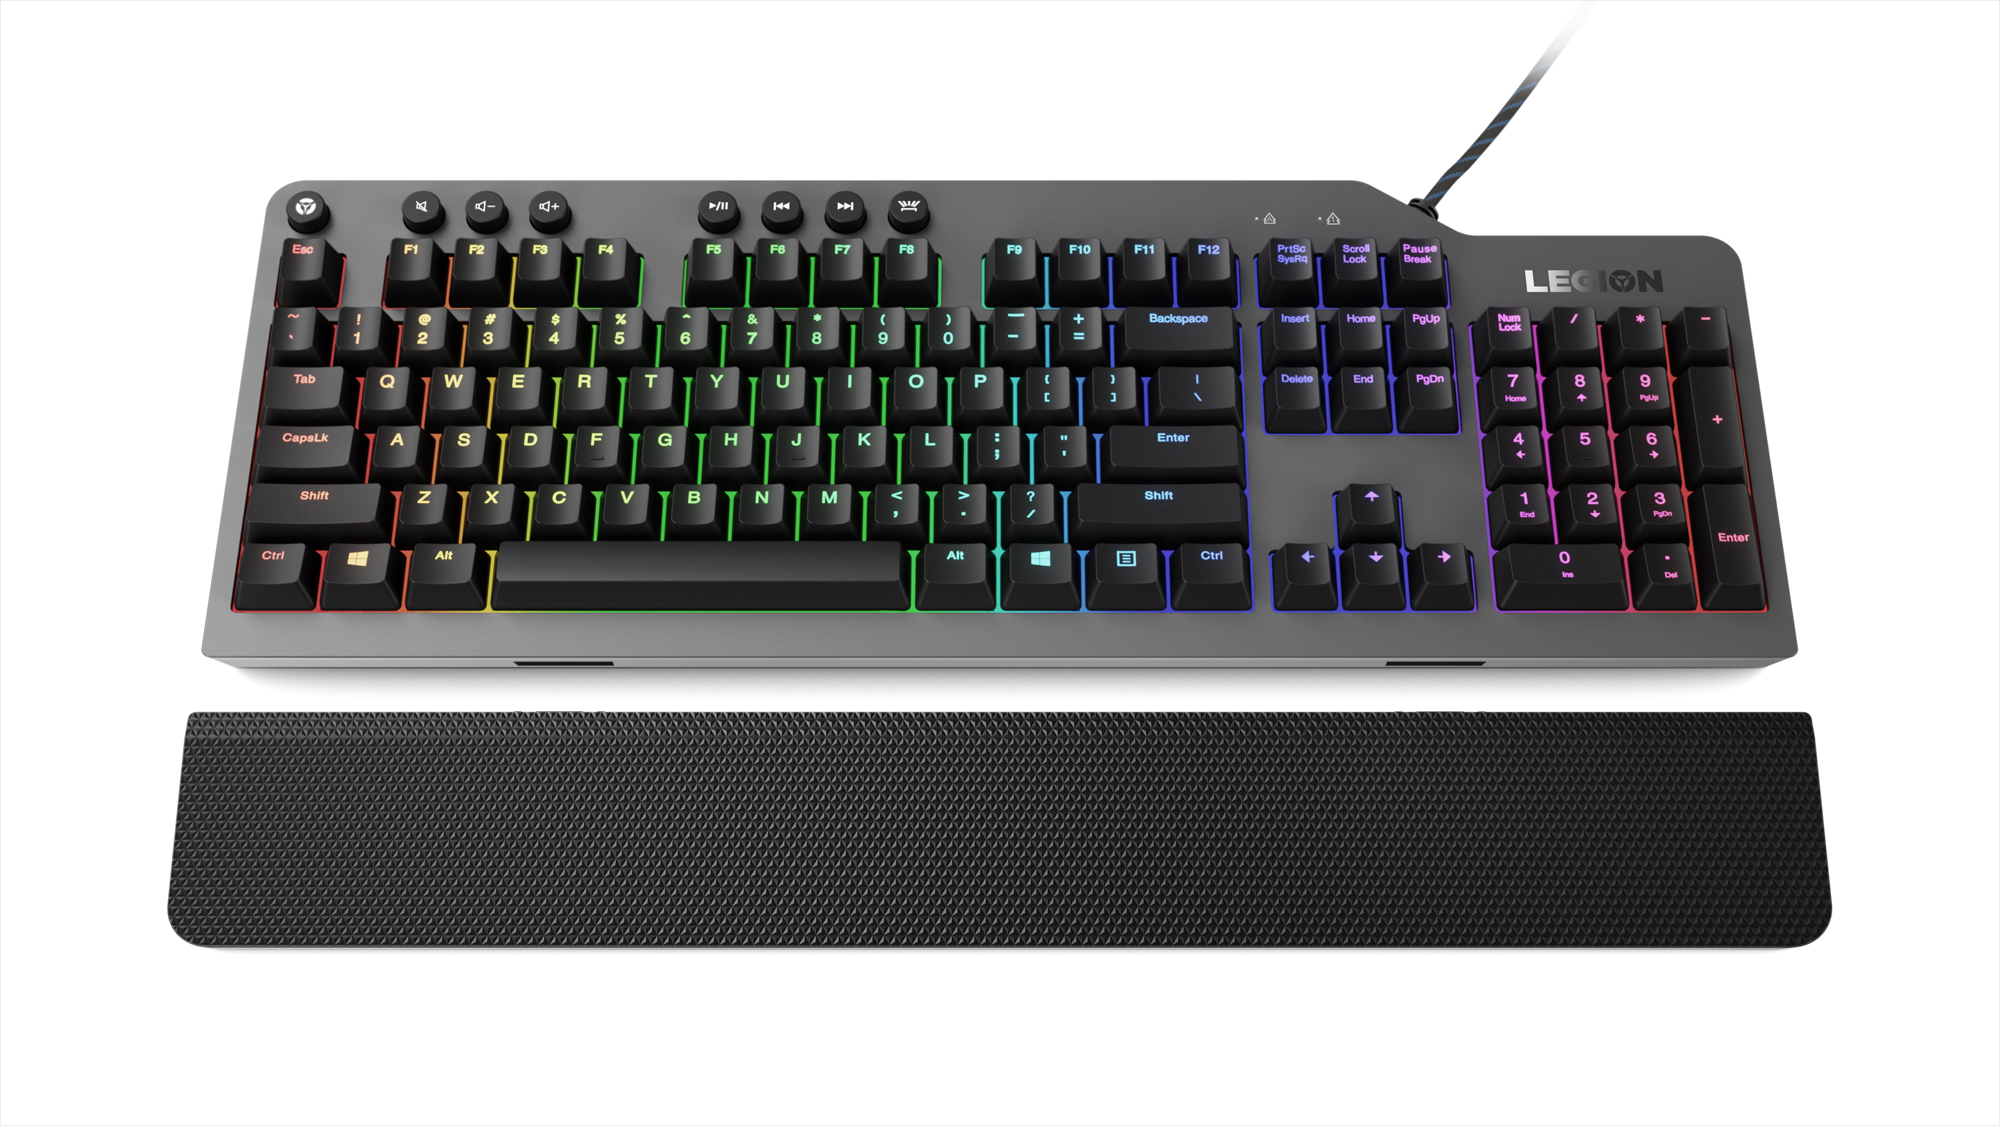 lenovo announce new legion gaming peripherals ces 2019 10 k500 palm rest detached from the keyboard